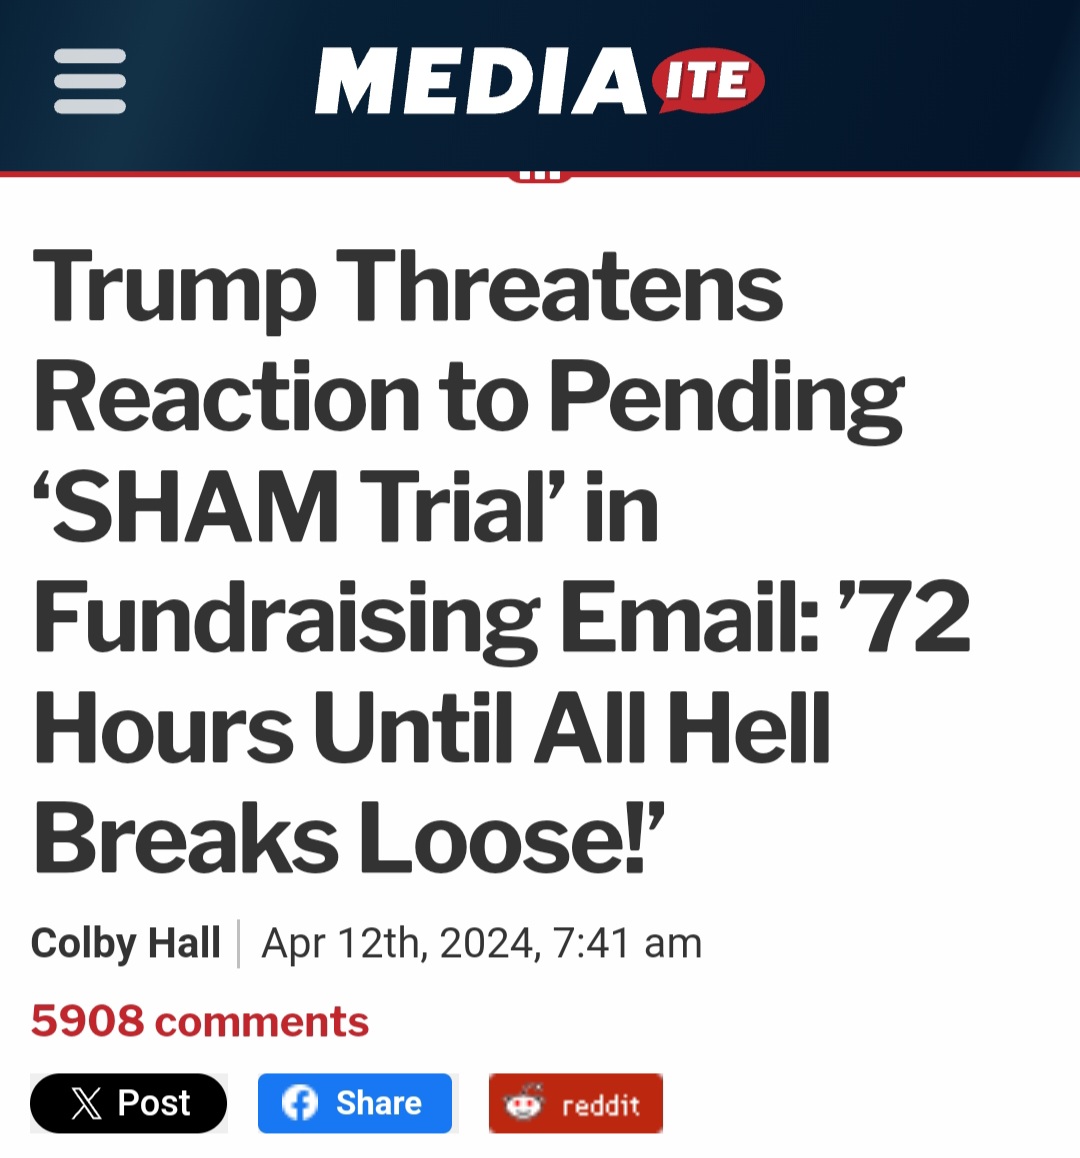 🚨There Is That Number 72 Again Report: 72 HOURS UNTIL ALL HELL BREAKS LOOSE! Now is the time to help me SAVE AMERICA and chip in. Friend, on Monday, my SHAM trial in New York begins. THEY WANT ME IN PRISON! Democrats are chomping at the bit. They think if you see me sitting…